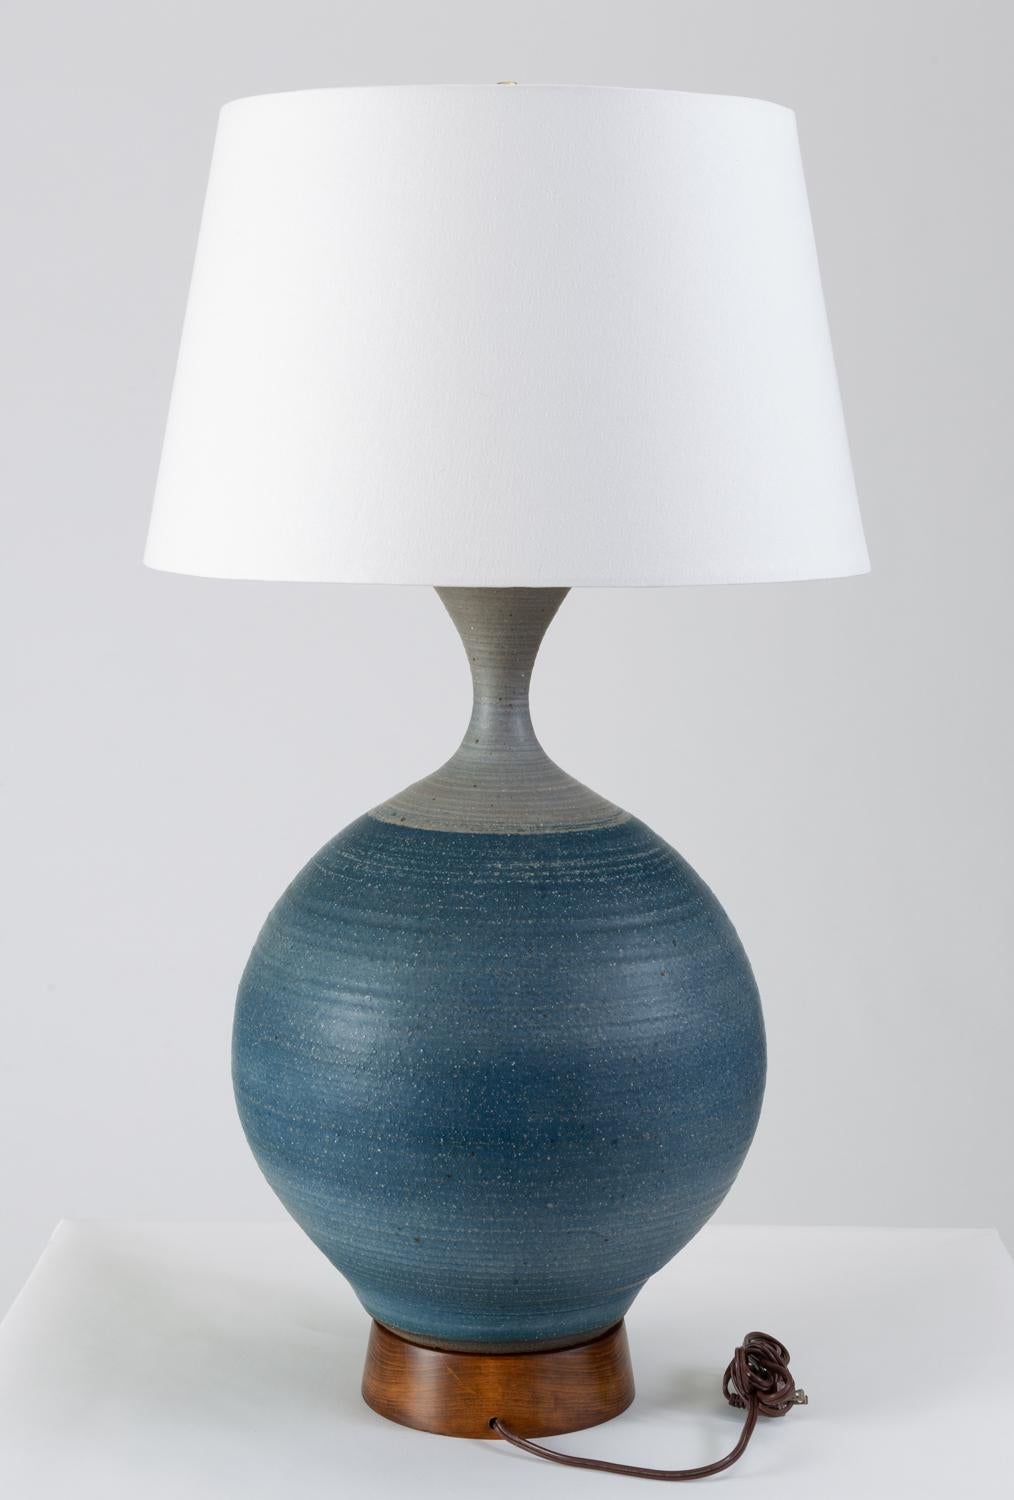 American Large Stoneware Lamp by Bob Kinzie for Affiliated Craftsmen